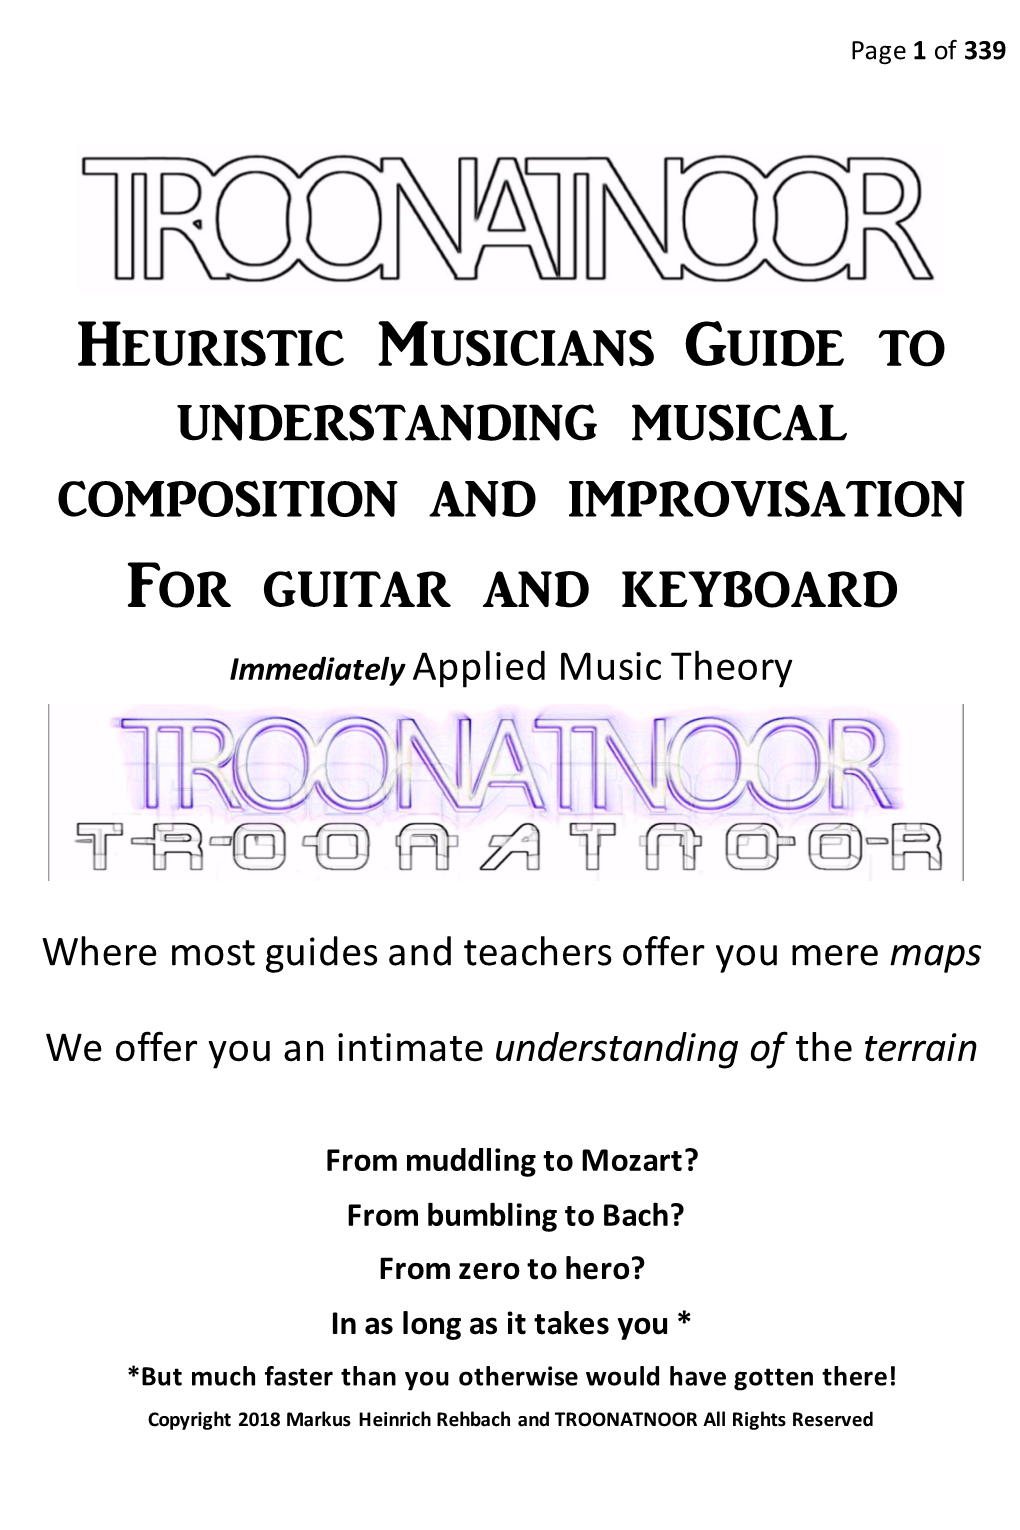 Heuristic Musicians Guide to Understanding Musical Composition and Improvisation for Guitar and Keyboard Immediately Applied Music Theory